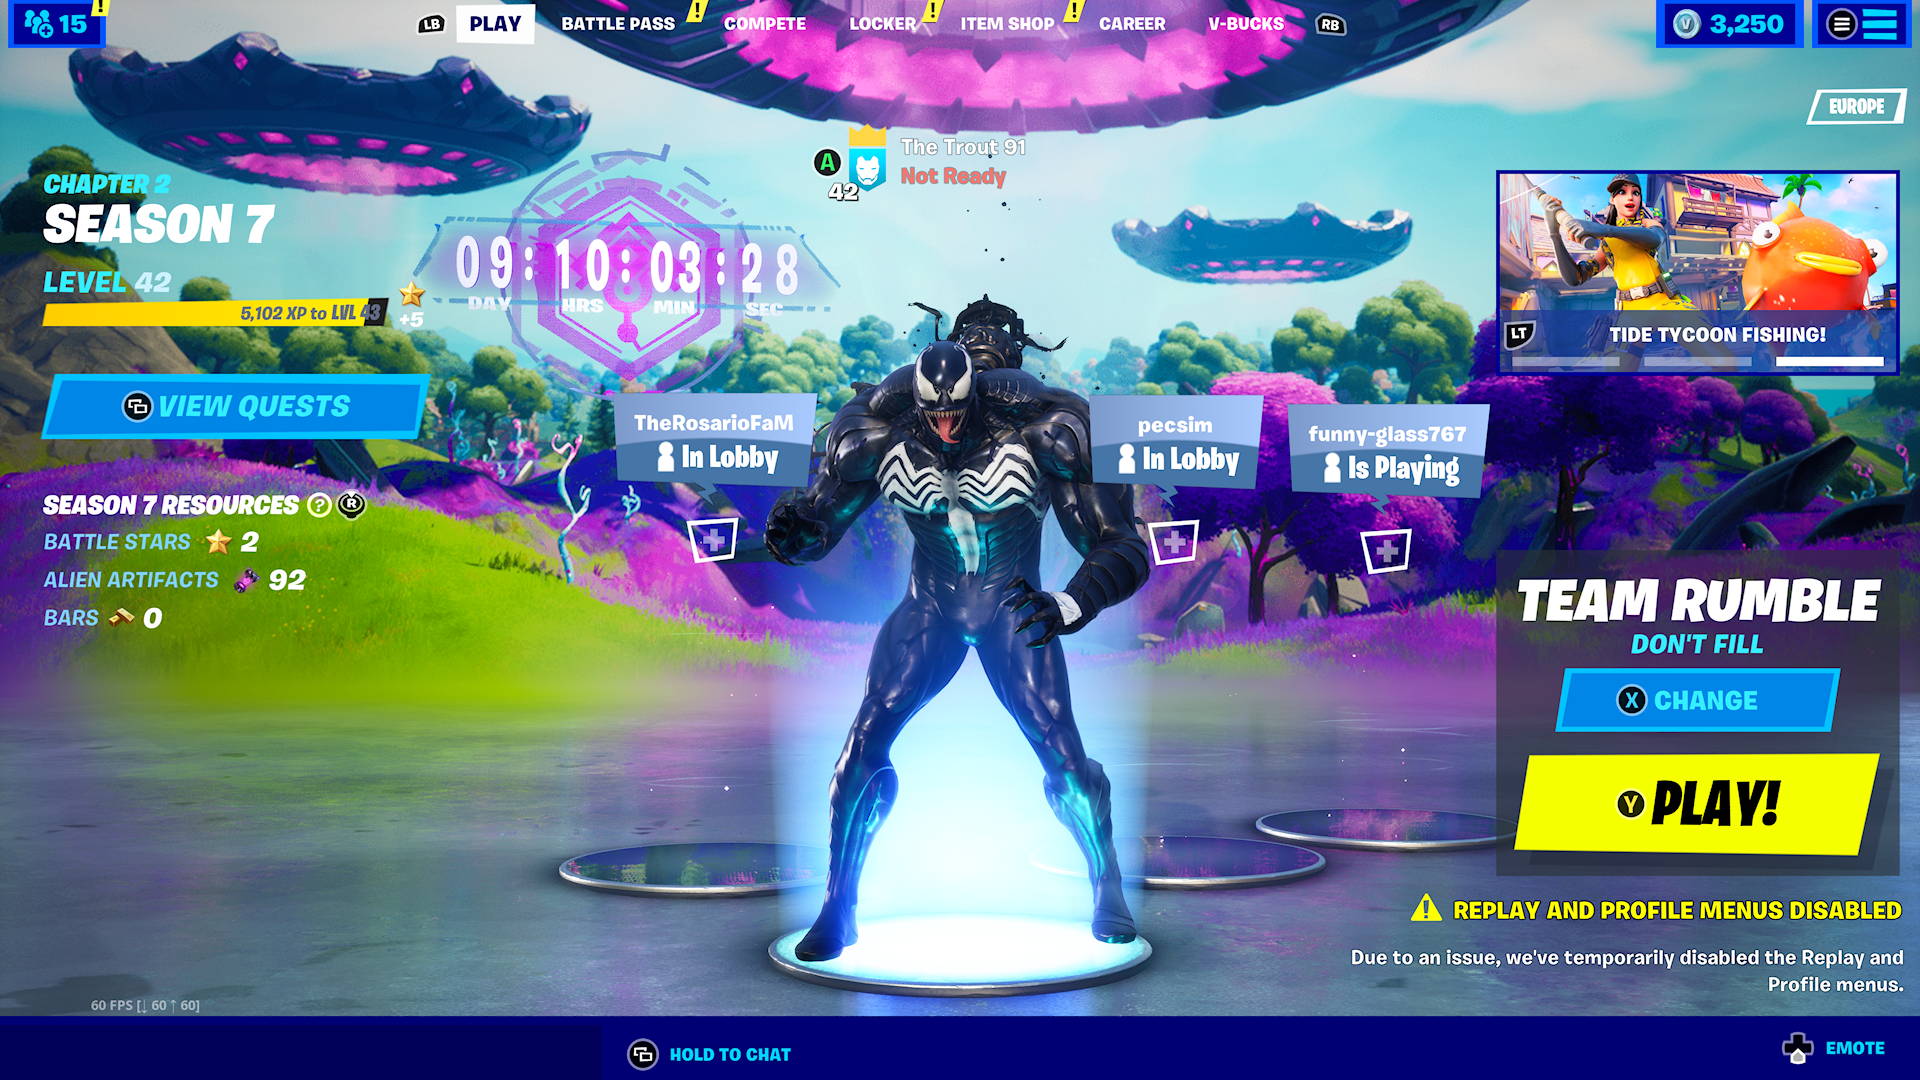 Fortnite Event August 2021 Countdown: Release Date, What Is The Timer For, And Everything